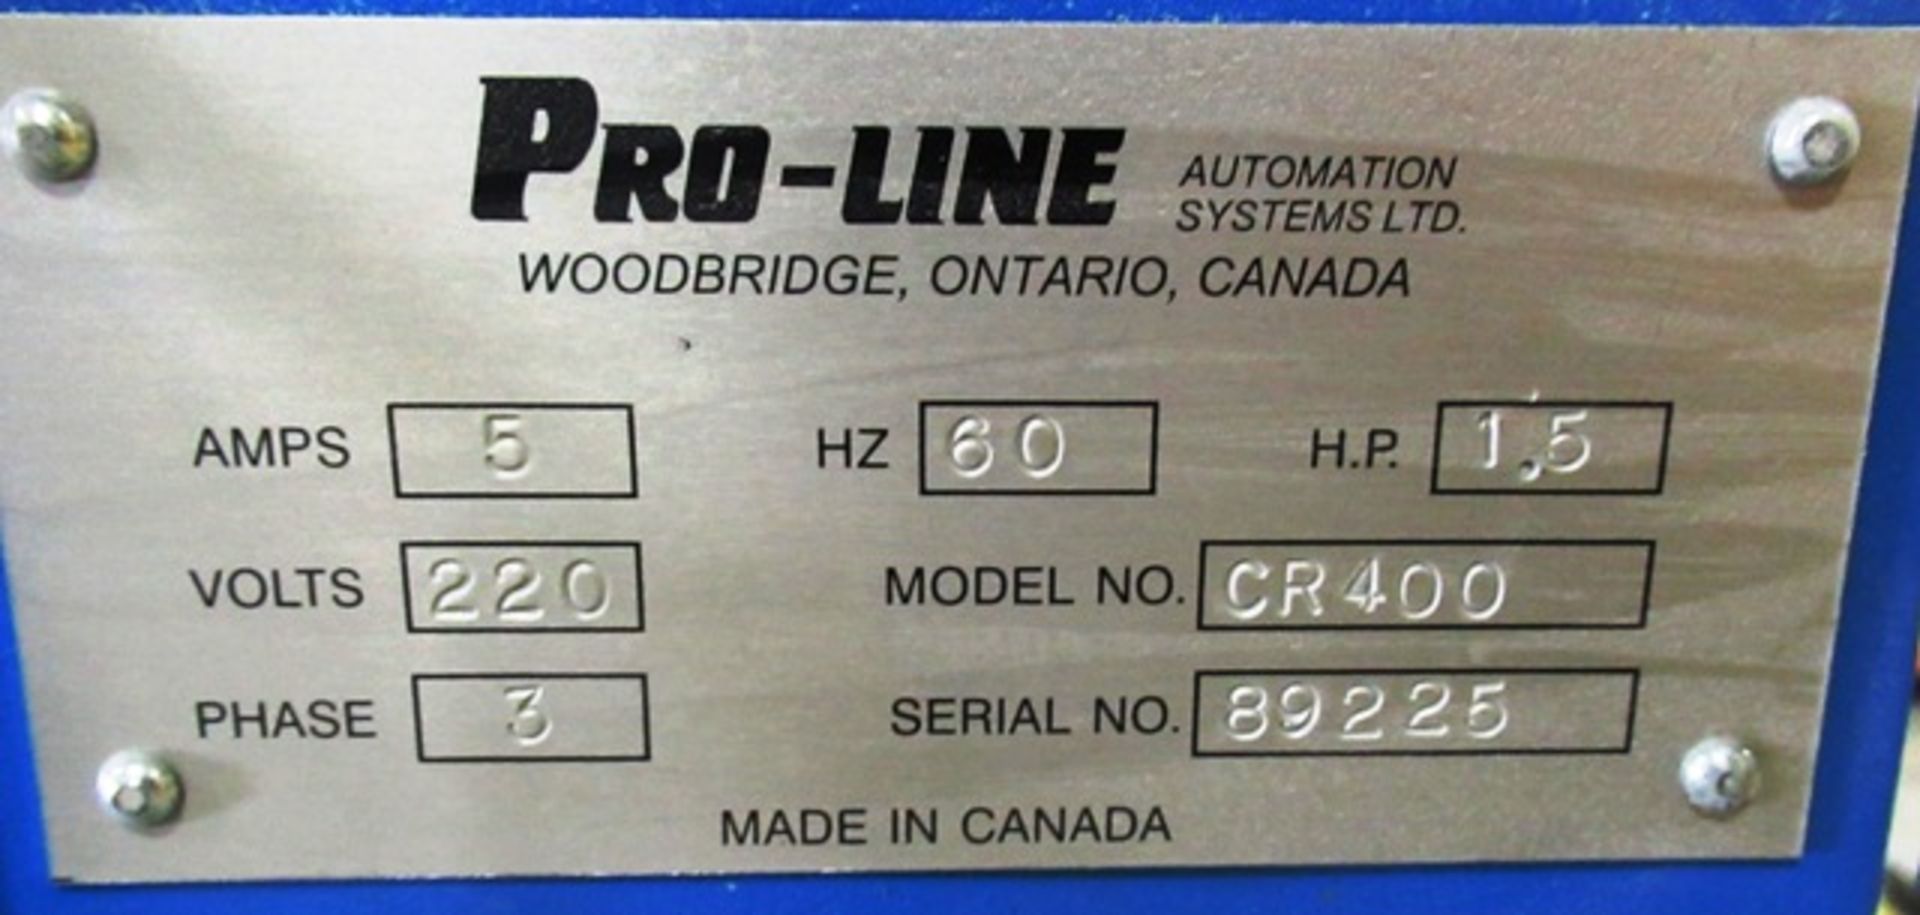 PRO-LINE CR400 SINGLE SPINDLE OVERHEAD ROUTER, S/N 89225 - Image 4 of 4